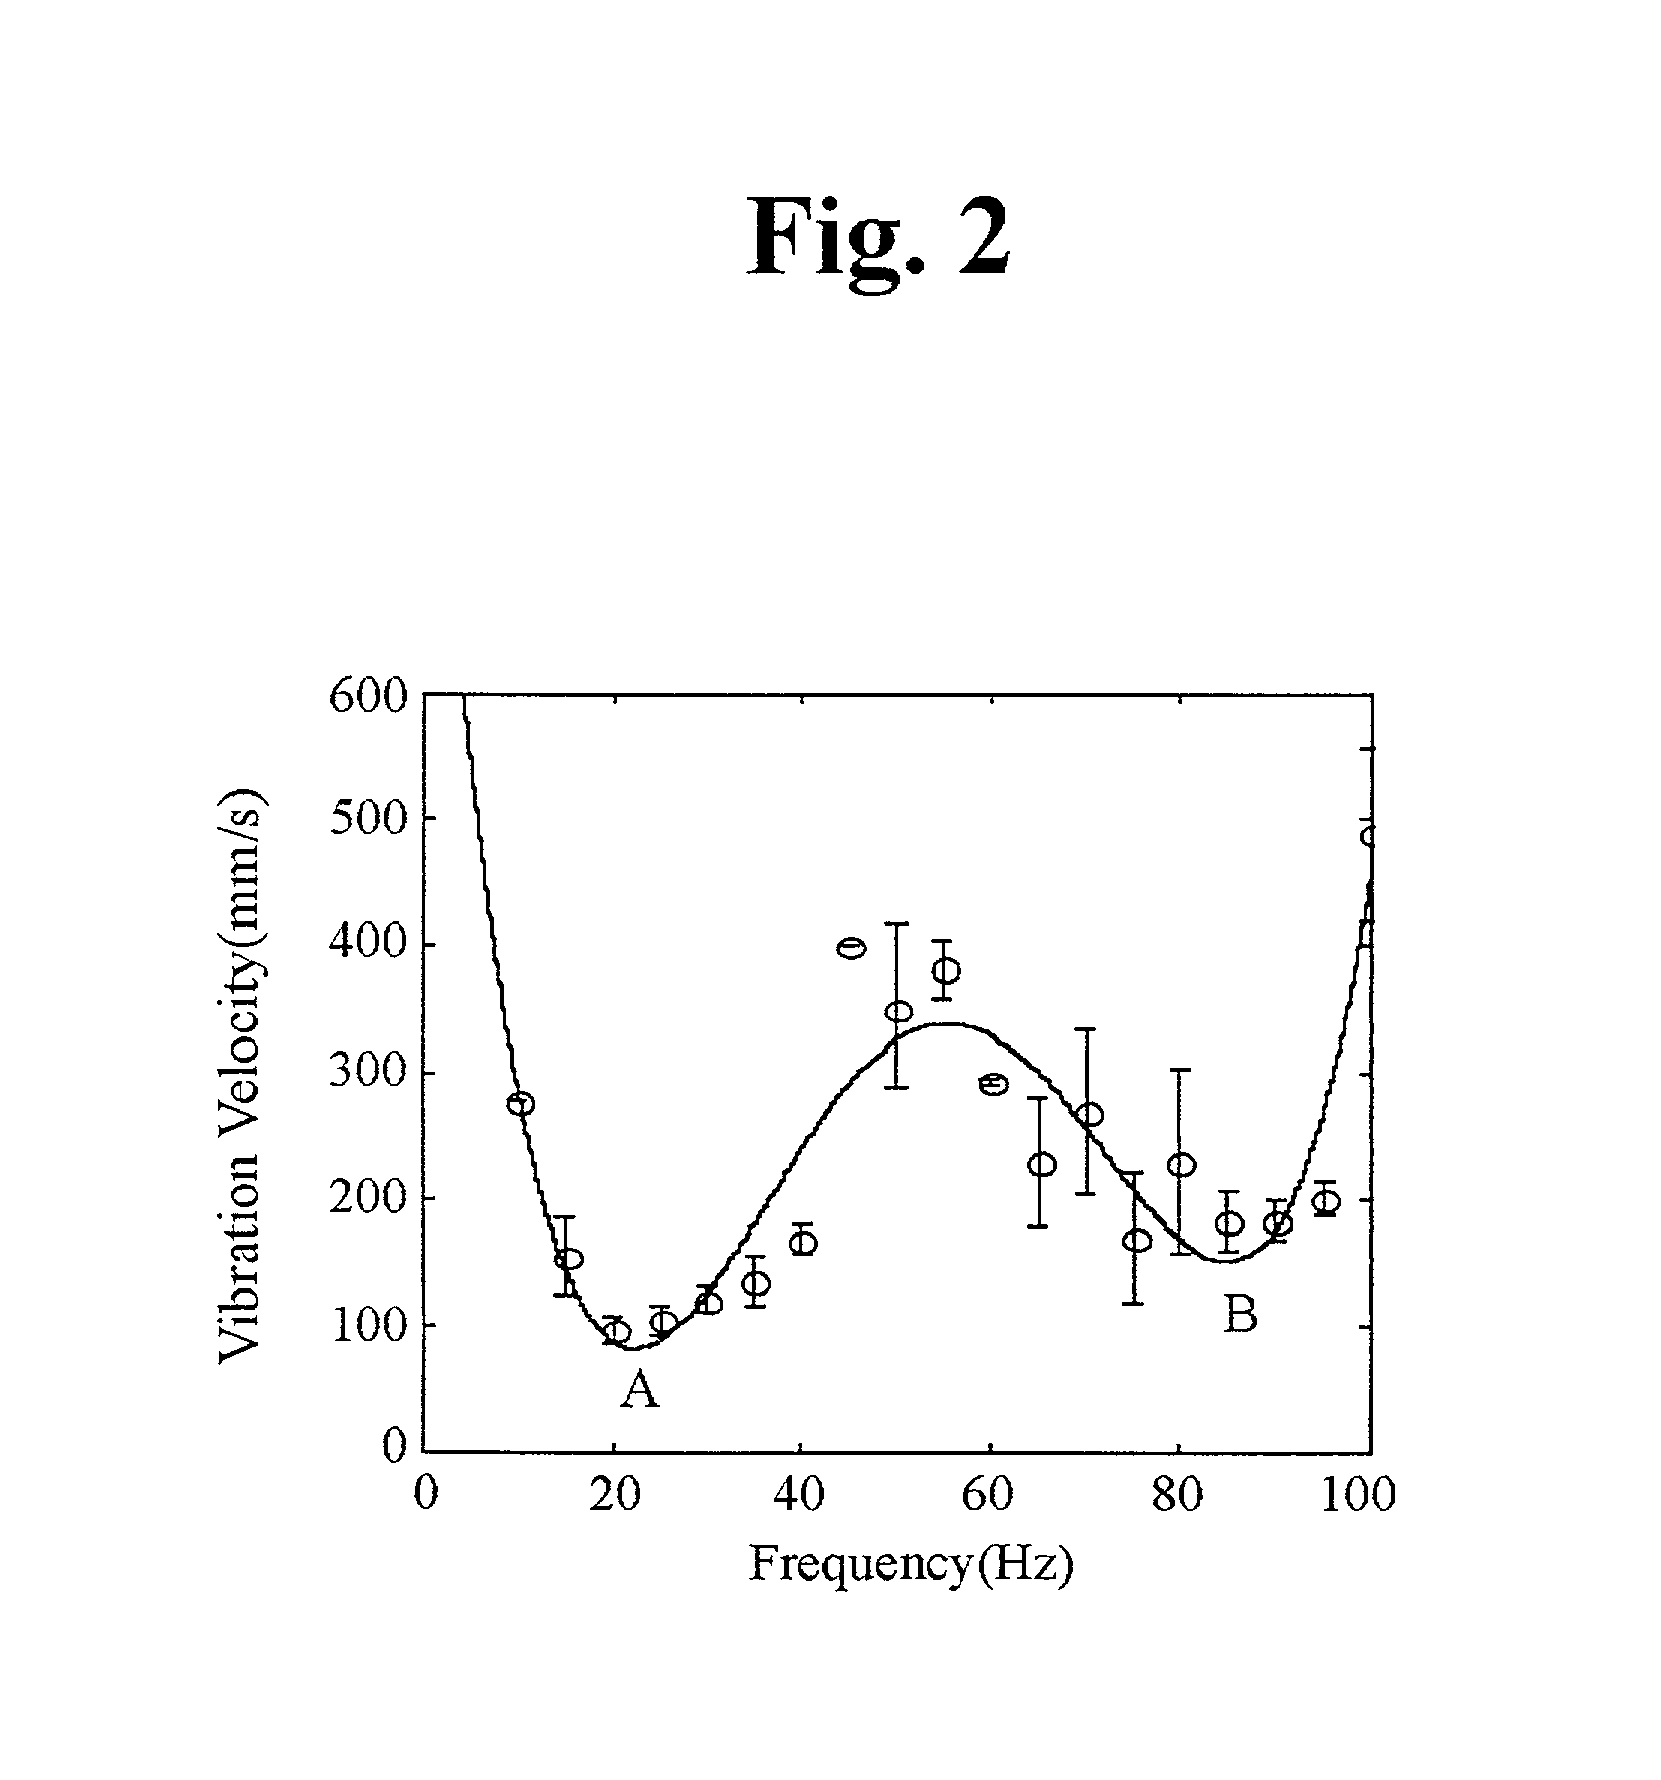 Apparatus for enhancing condensation and boiling of a fluid